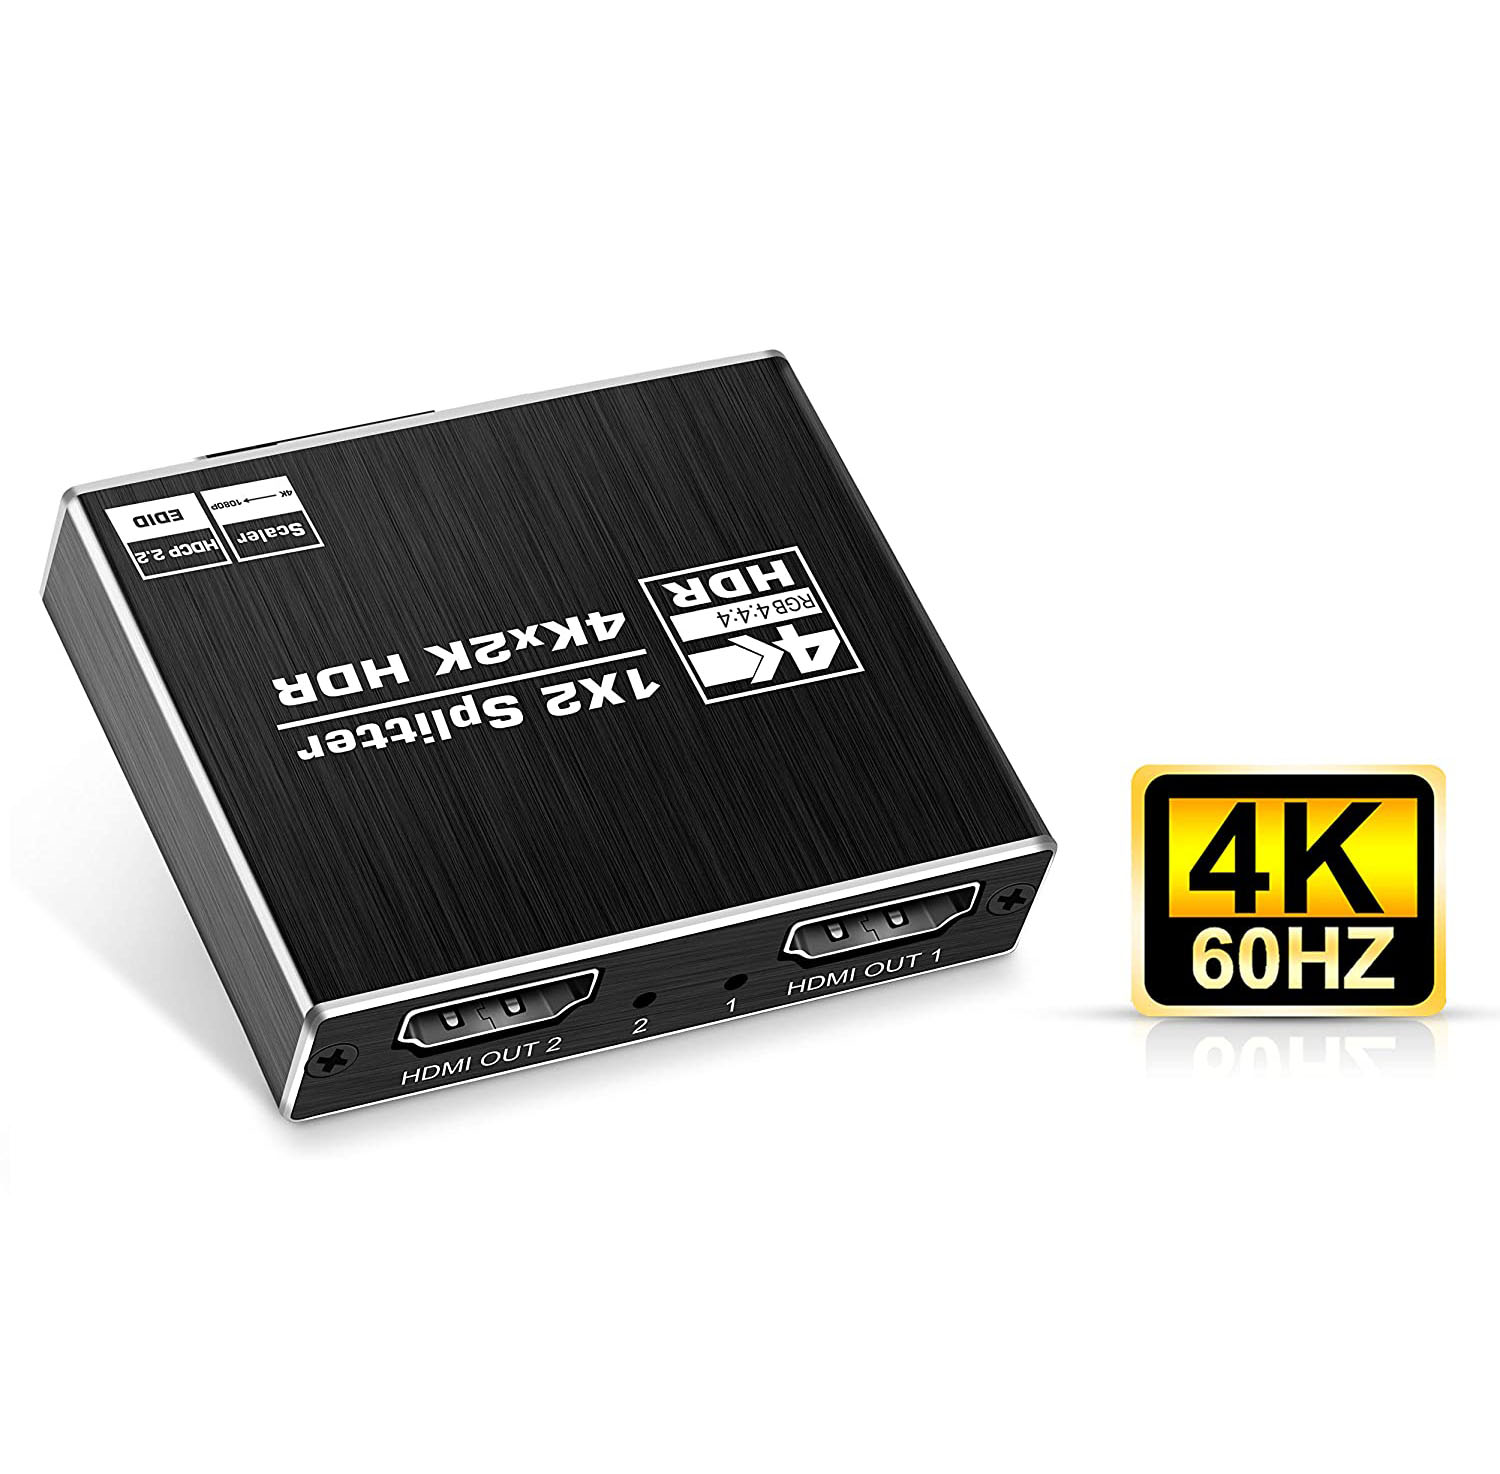 HF-H2SP2SC: 1 in 2 out 2 Ports 4K HDMI Splitter Support 4K@60Hz, 18Gbps. HDR Dolby Vision, HDCP 2.2,HDMI Down Scaler 4K to 1080P